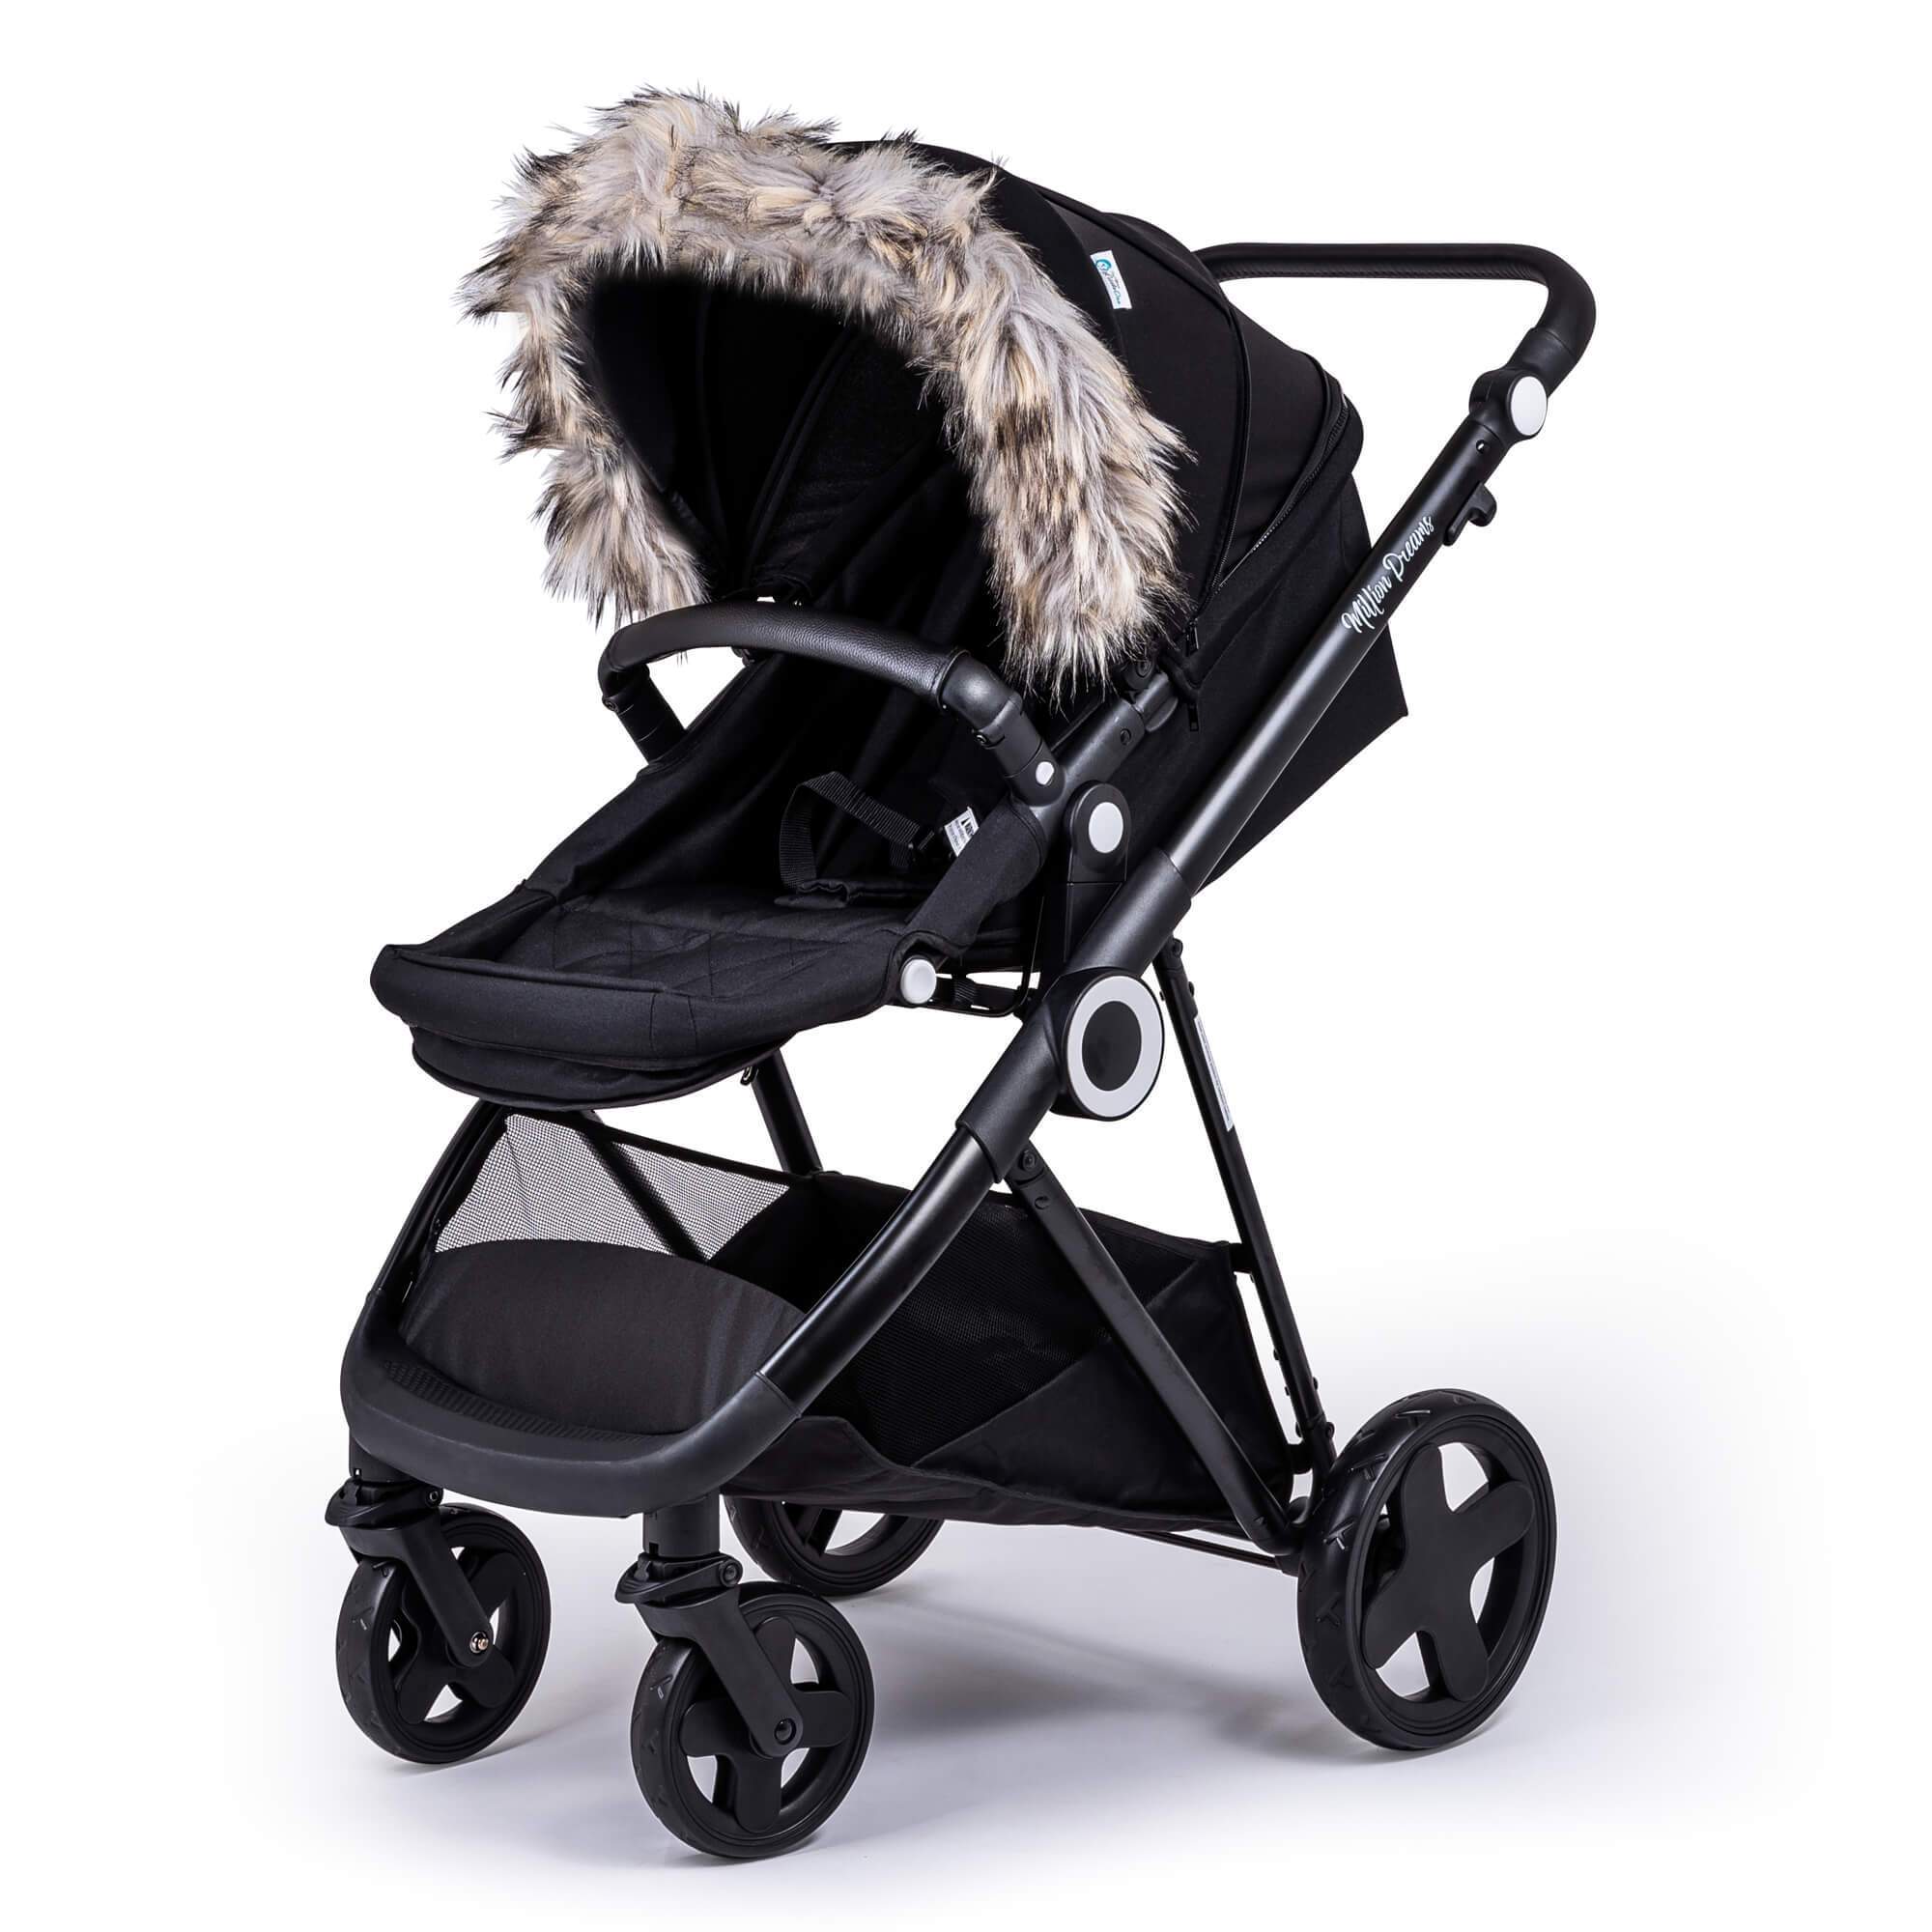 Pram Fur Hood Trim Attachment for Pushchair Compatible with Inglesina - Light Grey / Fits All Models | For Your Little One